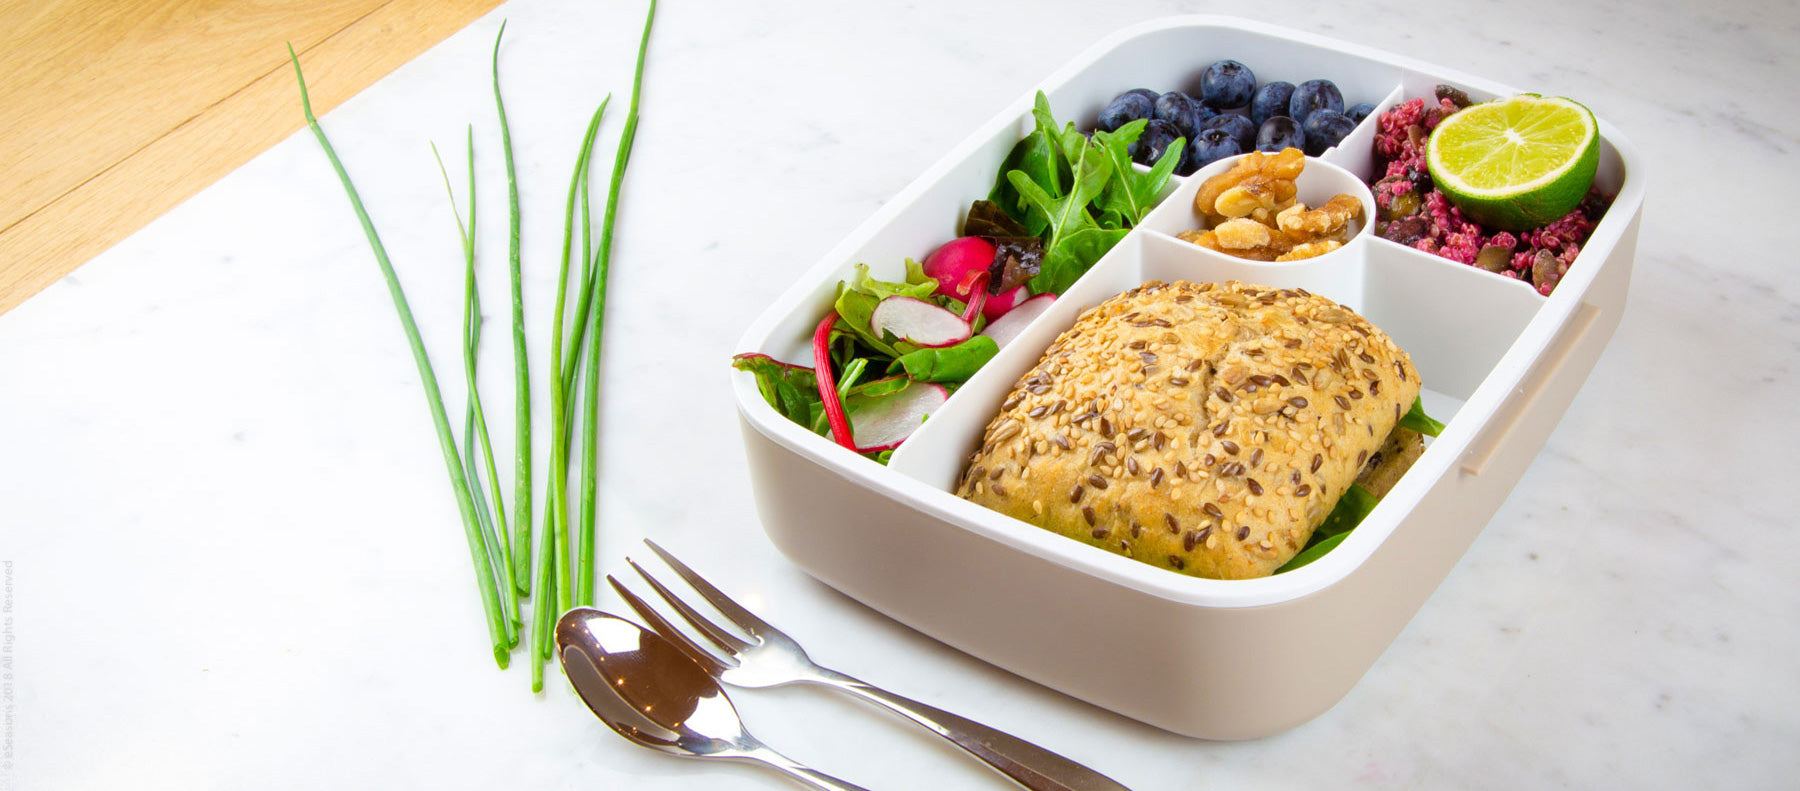 Gorgeous food photography: eSeasons Bento 5 compartment Lunchbox in Warm Grey with appetizing lunch of salad, blueberries, and sandwich